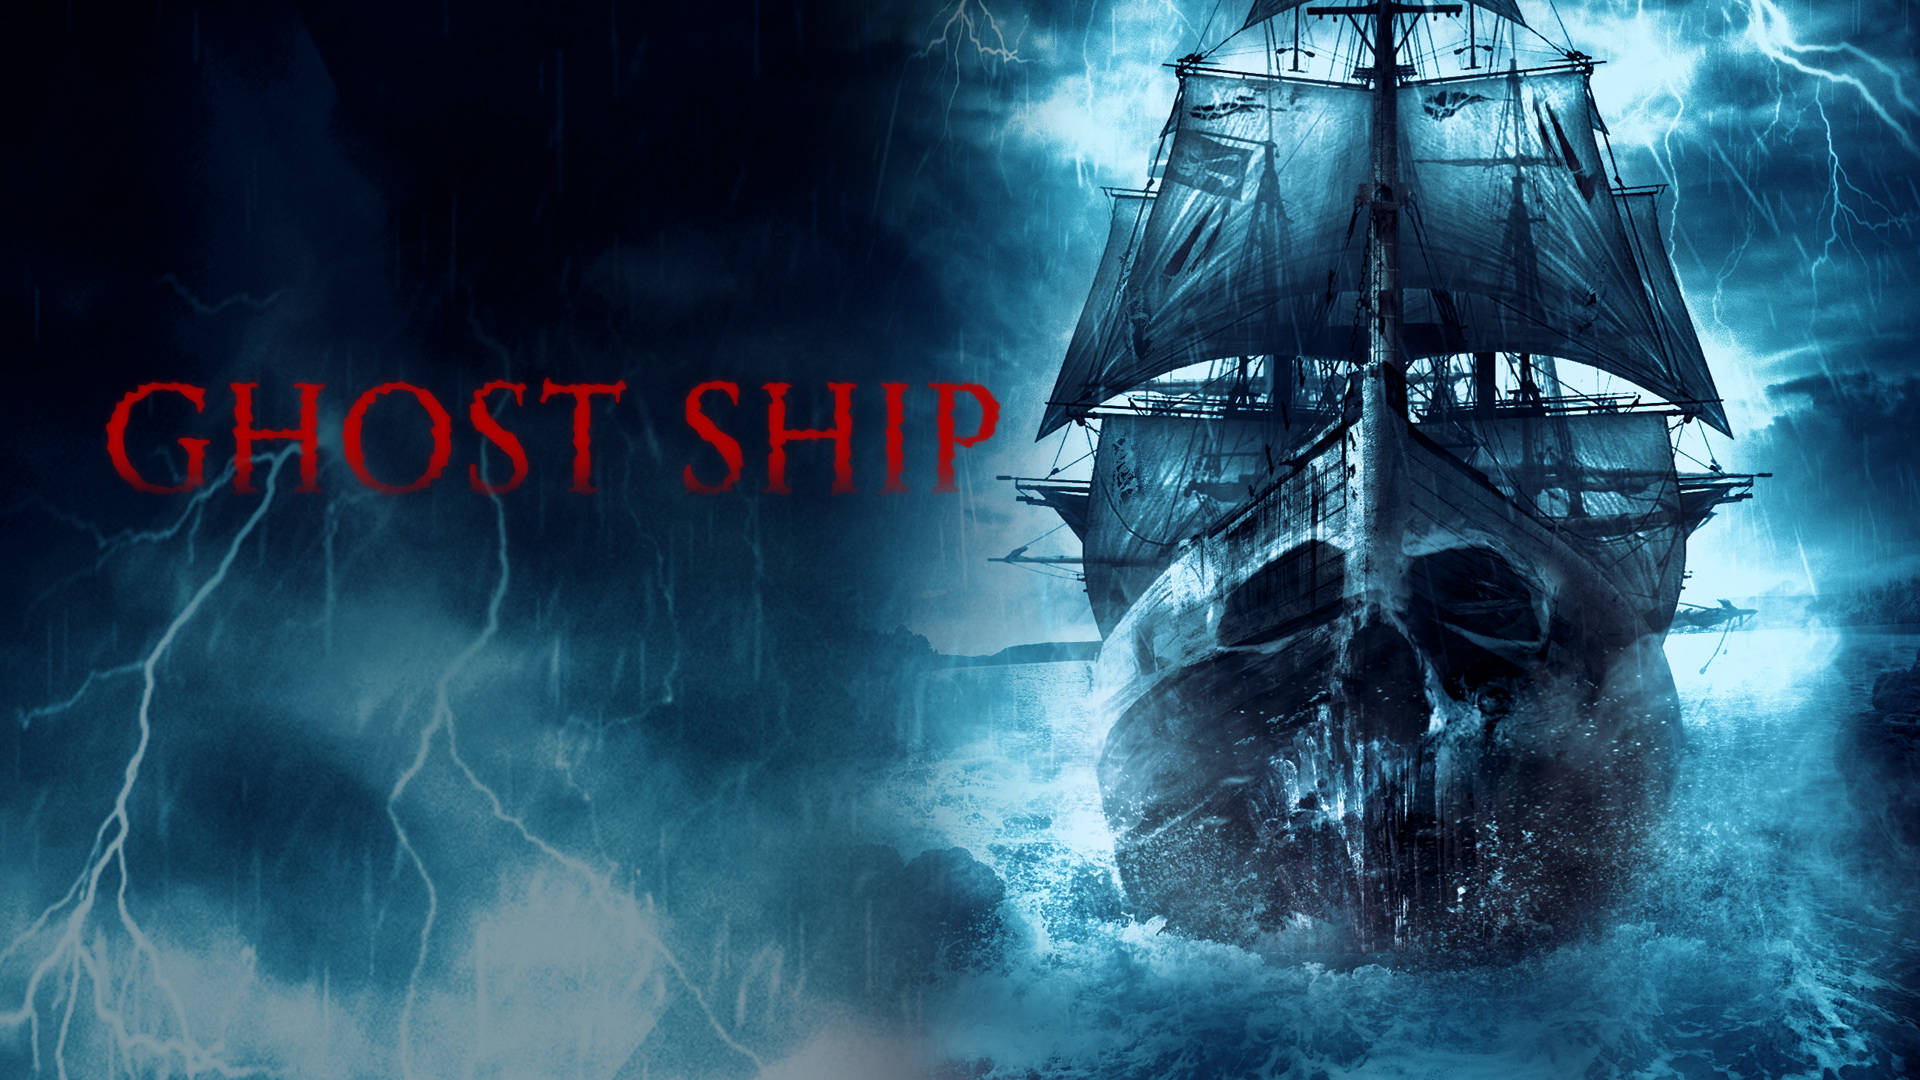 Ghost Ship Horror Movie Poster